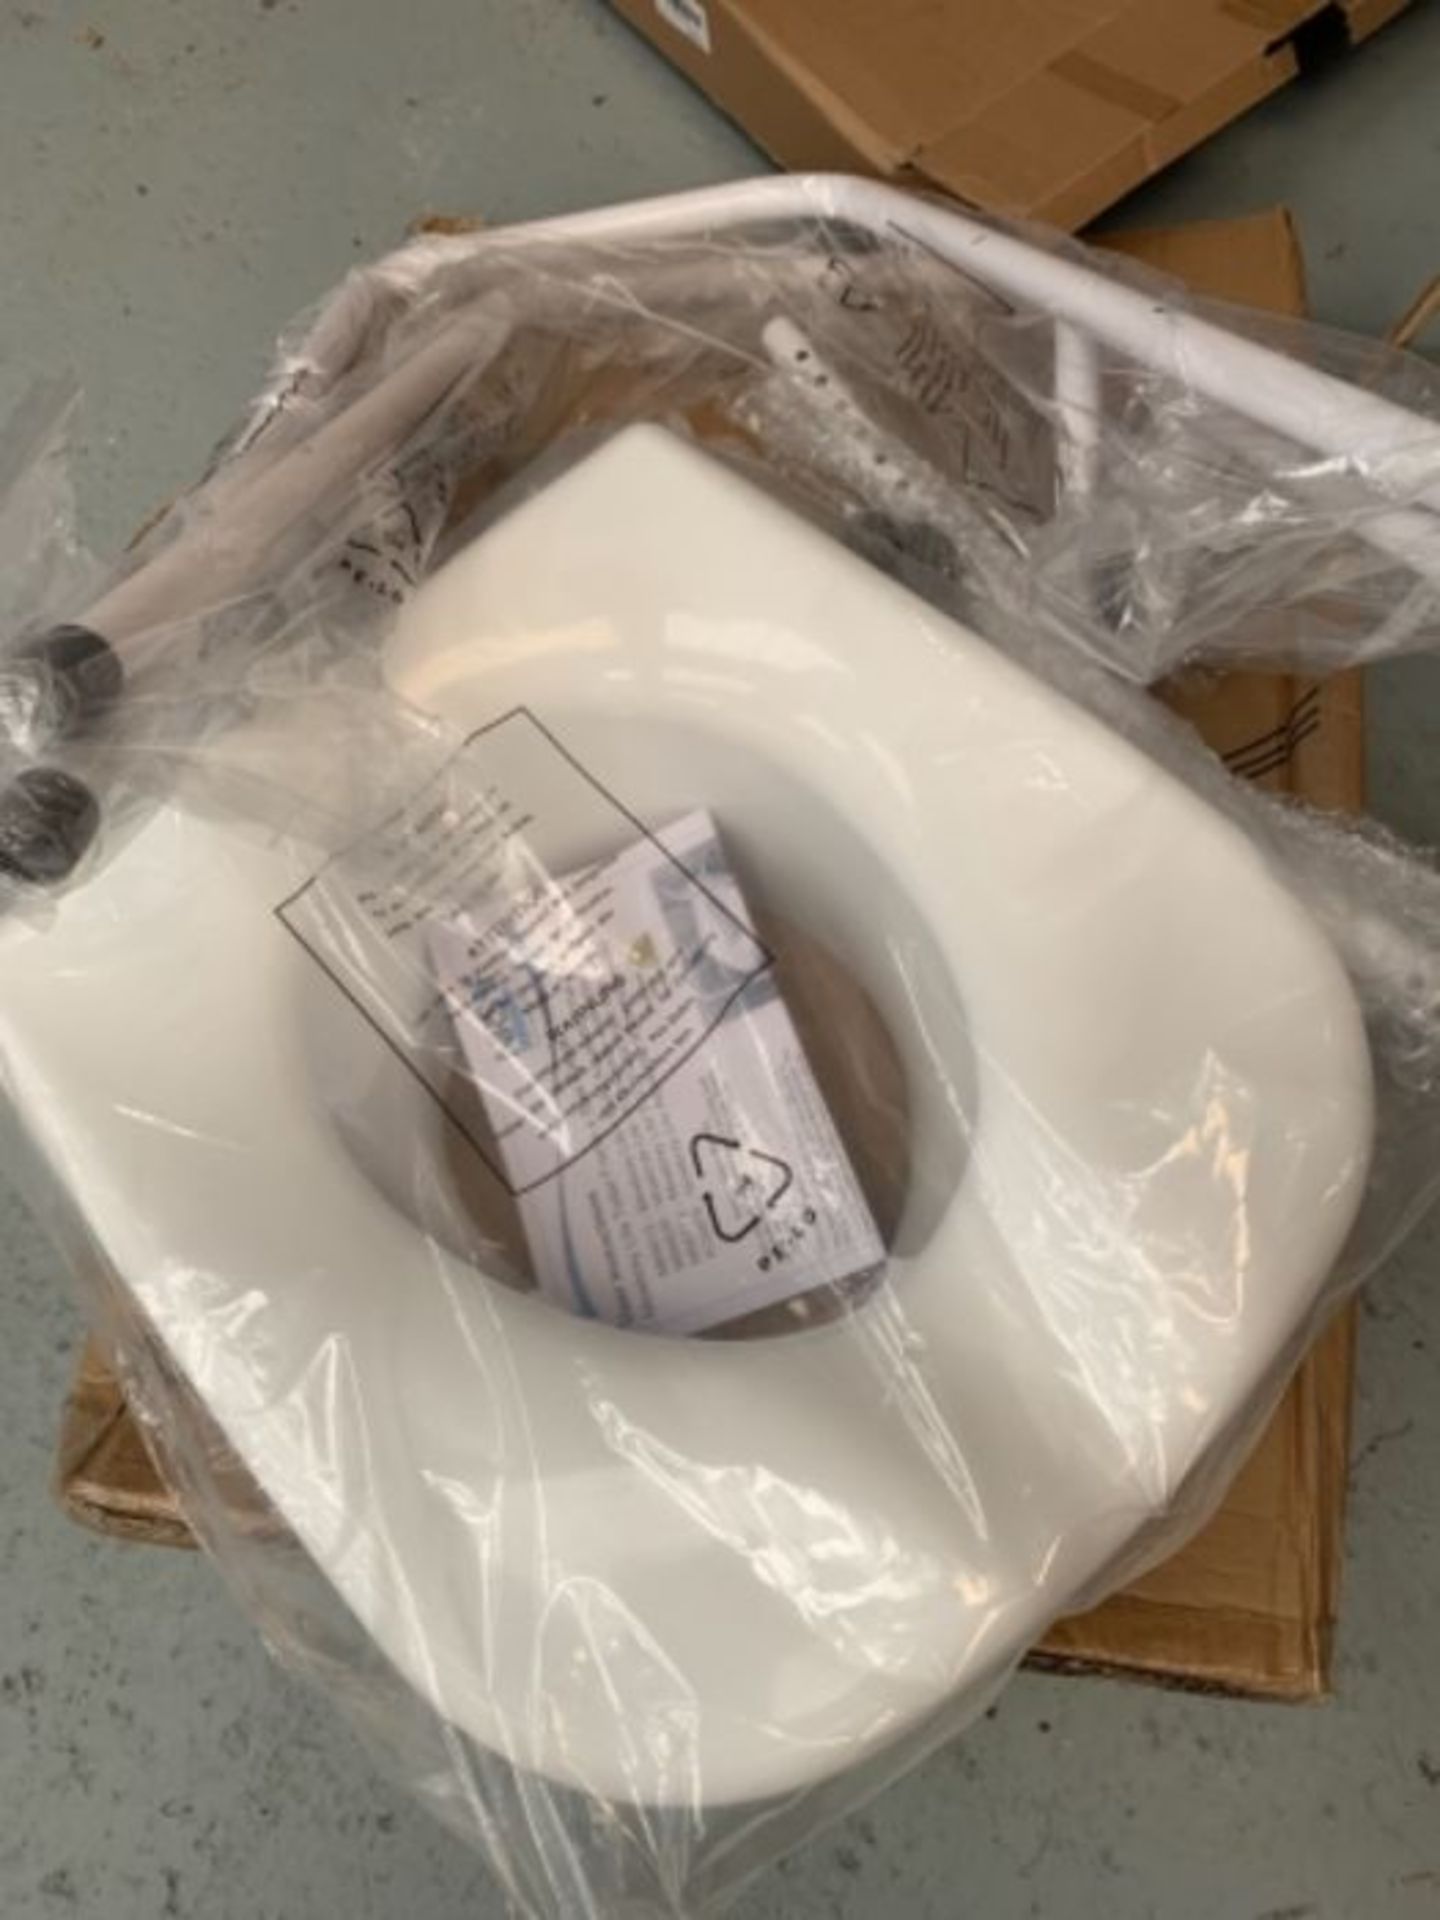 NRS Healthcare M66613 Mowbray Toilet Seat and Frame Lite - Width Adjustable - Flat Pac - Image 2 of 2